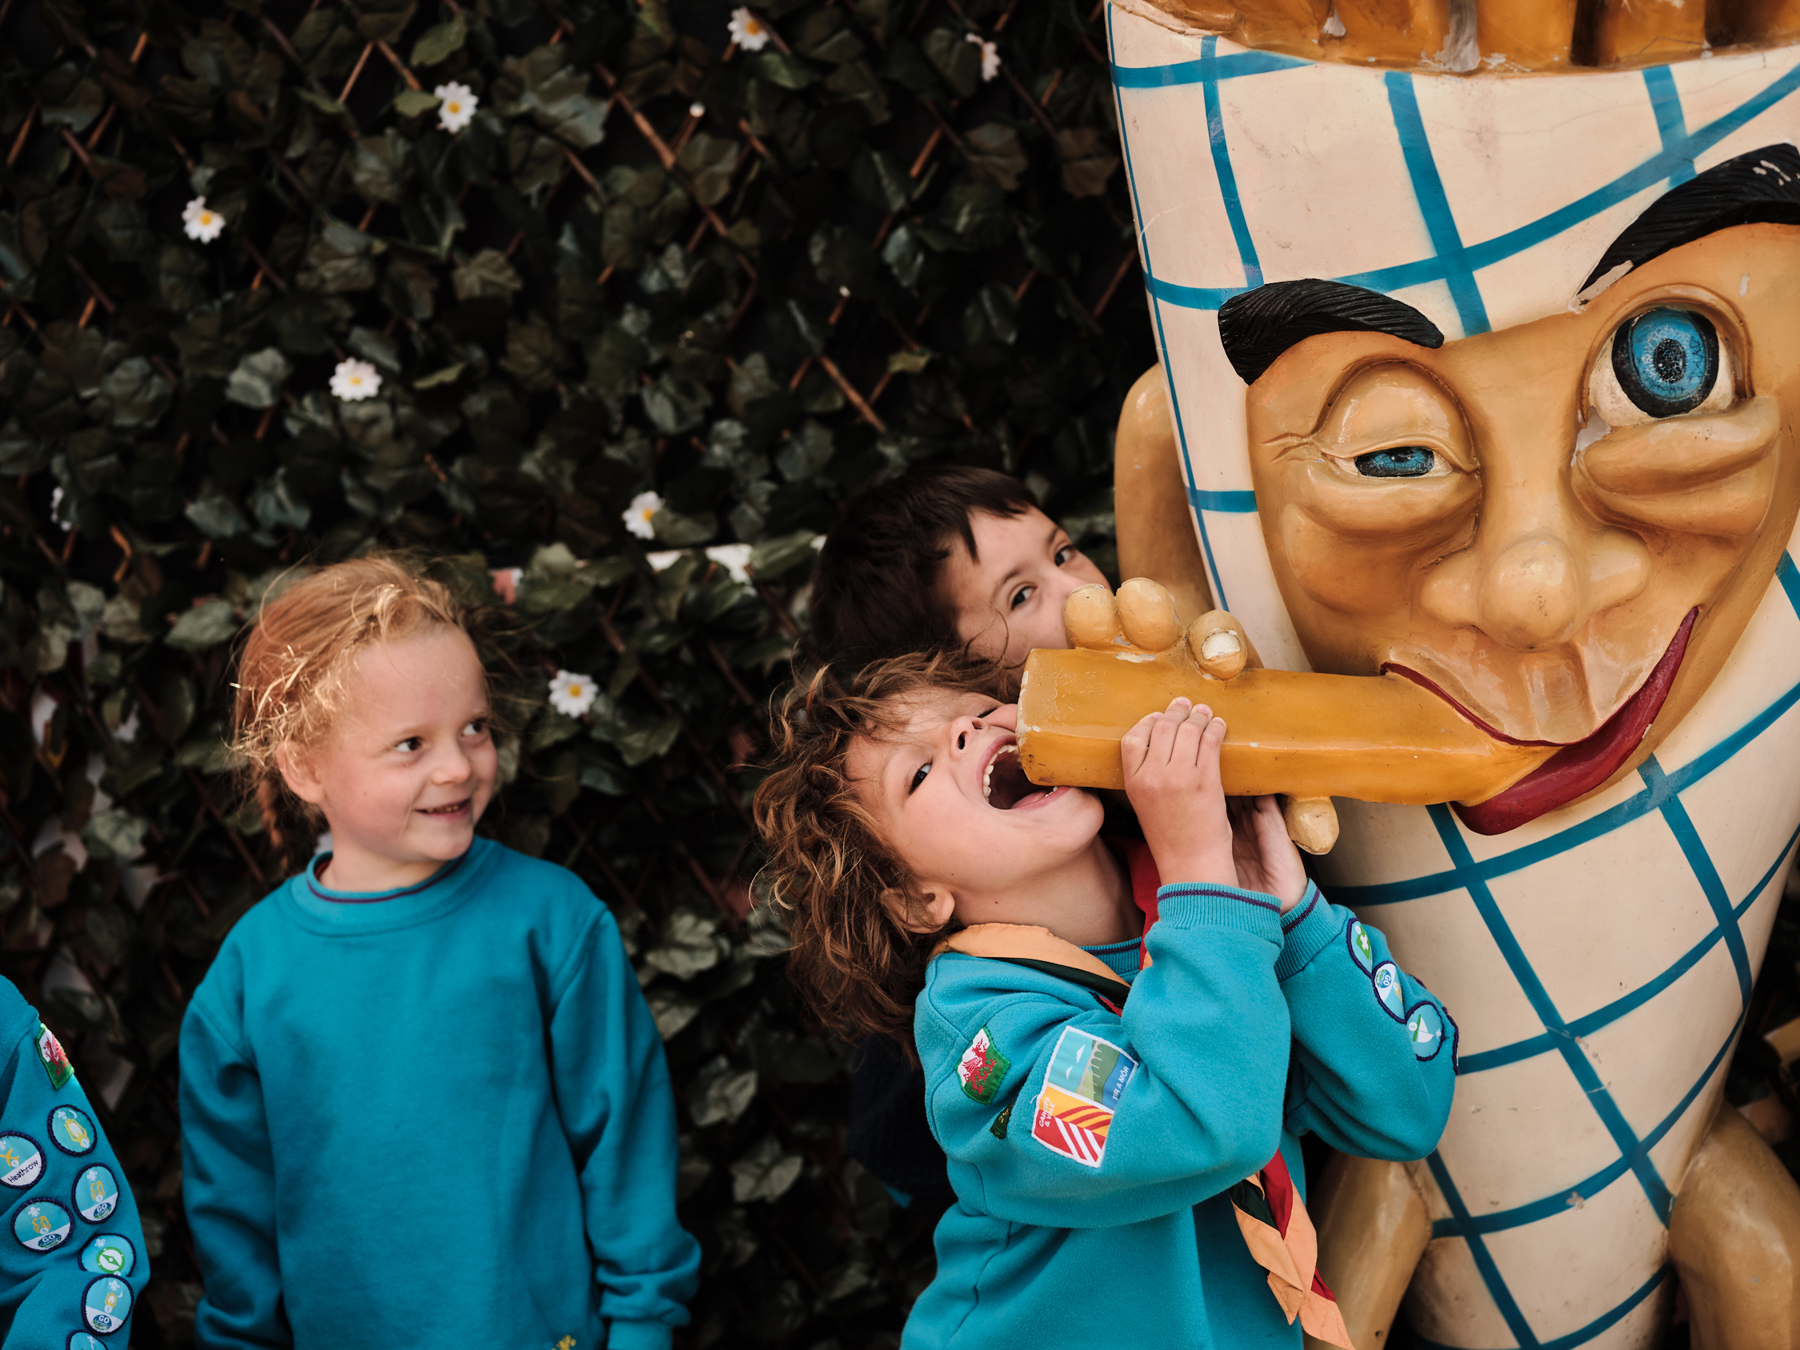 Four Beavers pose for a photo with a statue of a giant cone of chips. One of the Beavers is leaning up on his tip toes with his mouth wide open, pretending to eat the statue.